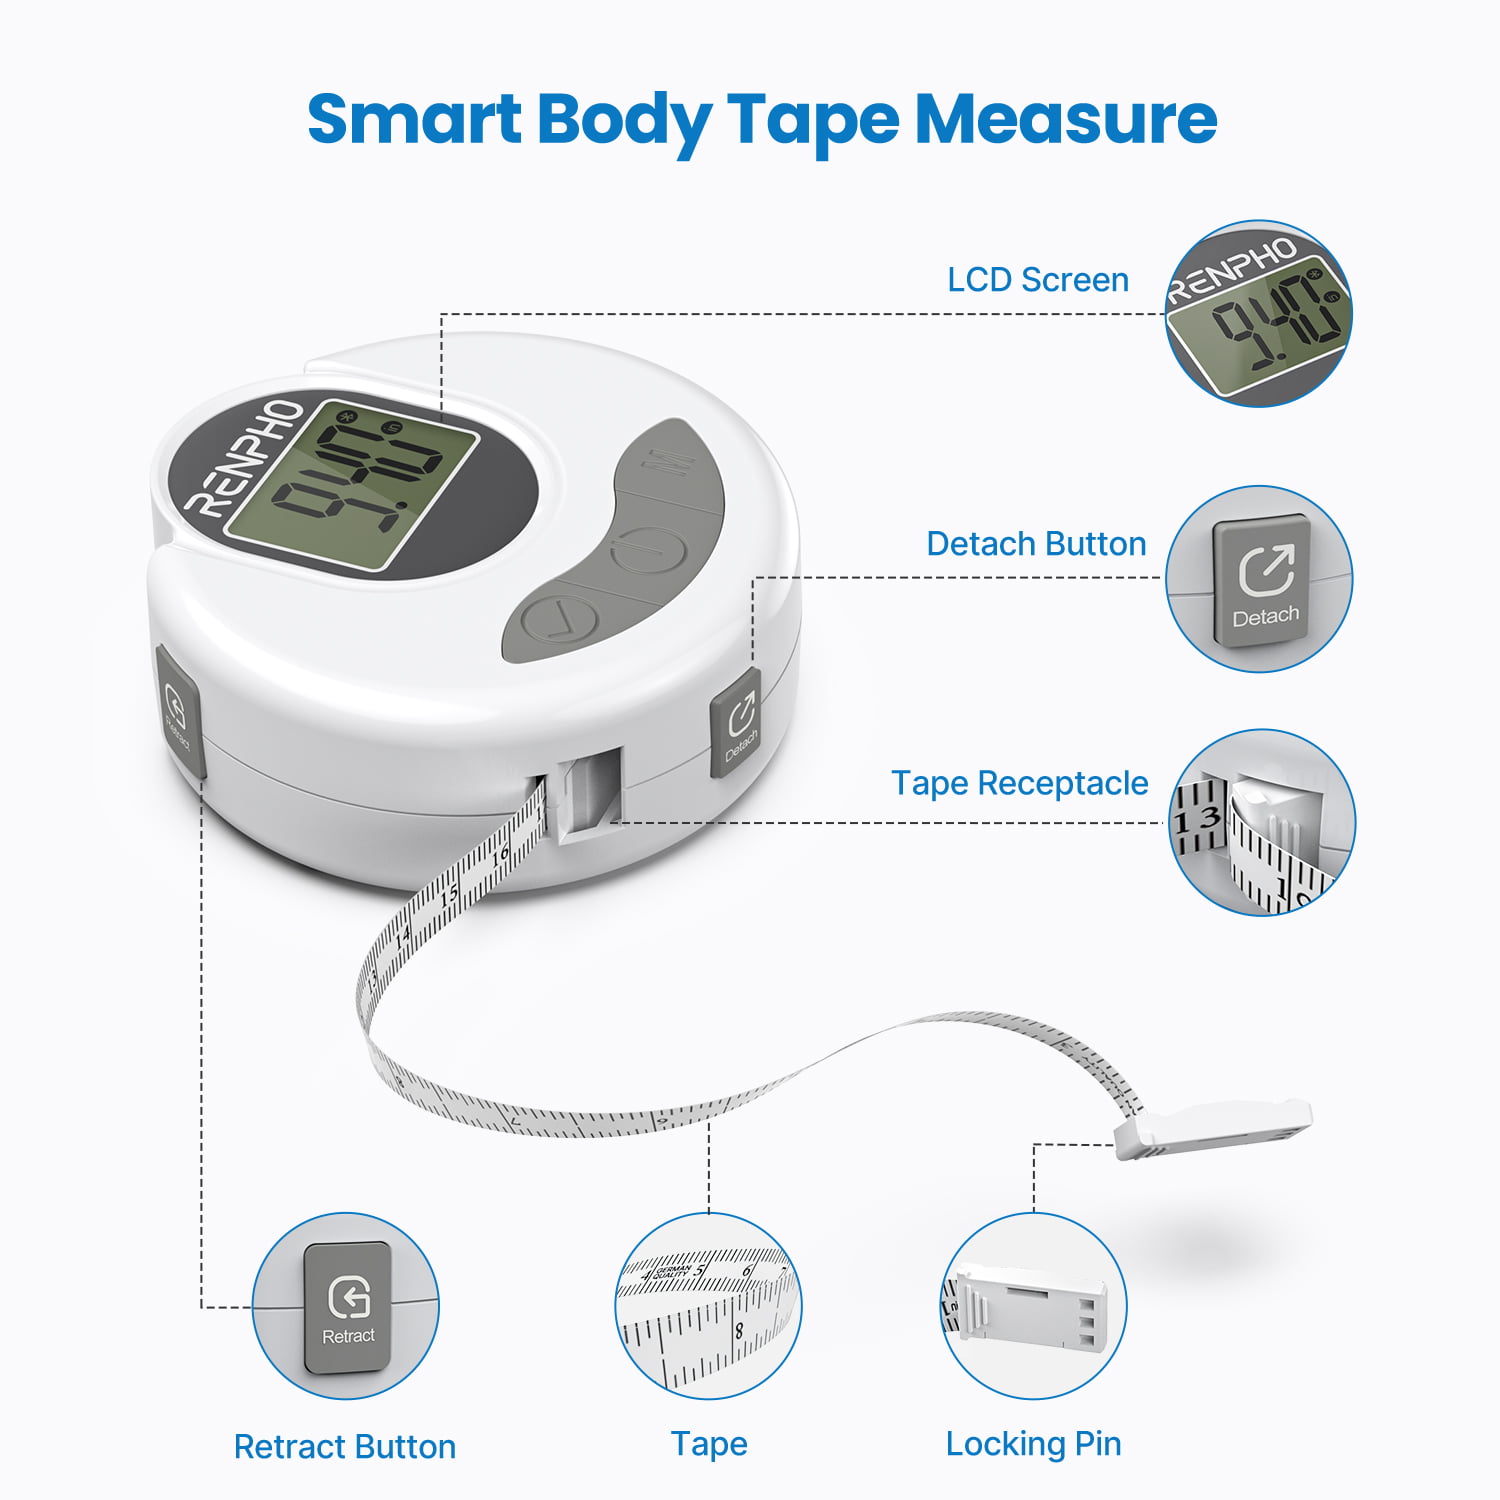 Bluetooth Low Energy smart tape measure provides highly accurate data 